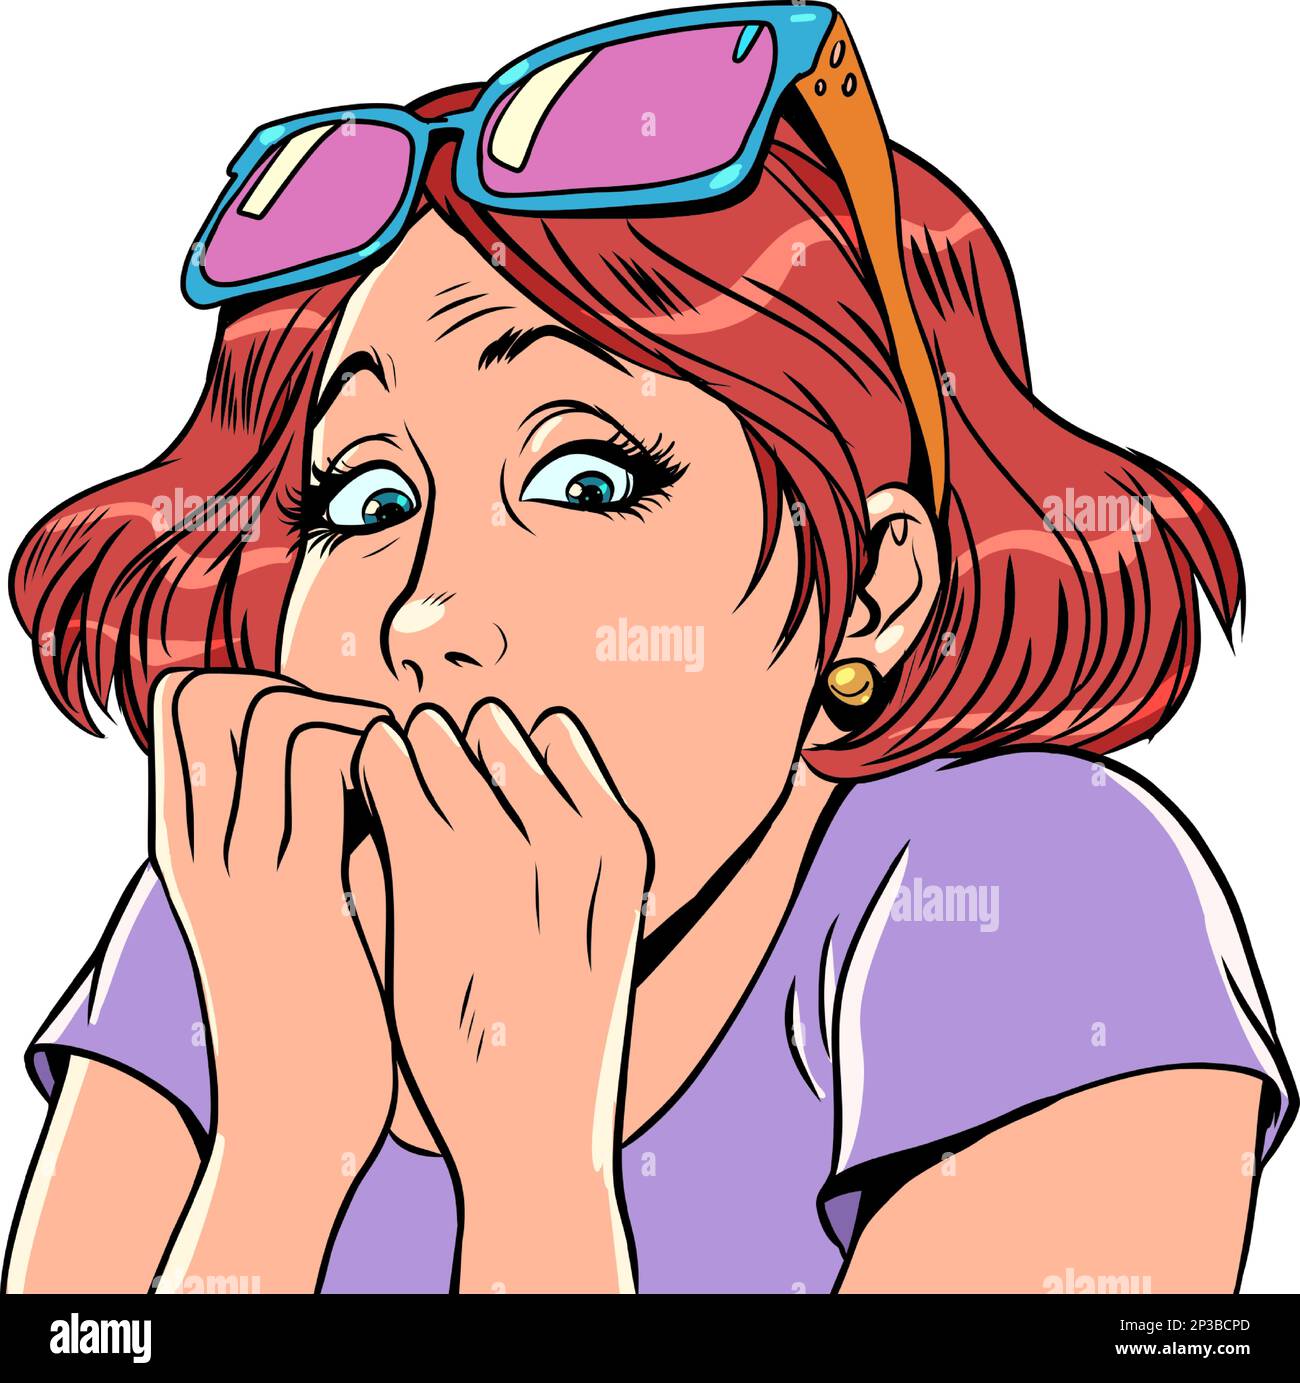 Surprise with an offer or service. Fear of the unknown. The girl with glasses reacted emotionally to what she saw. Stock Vector